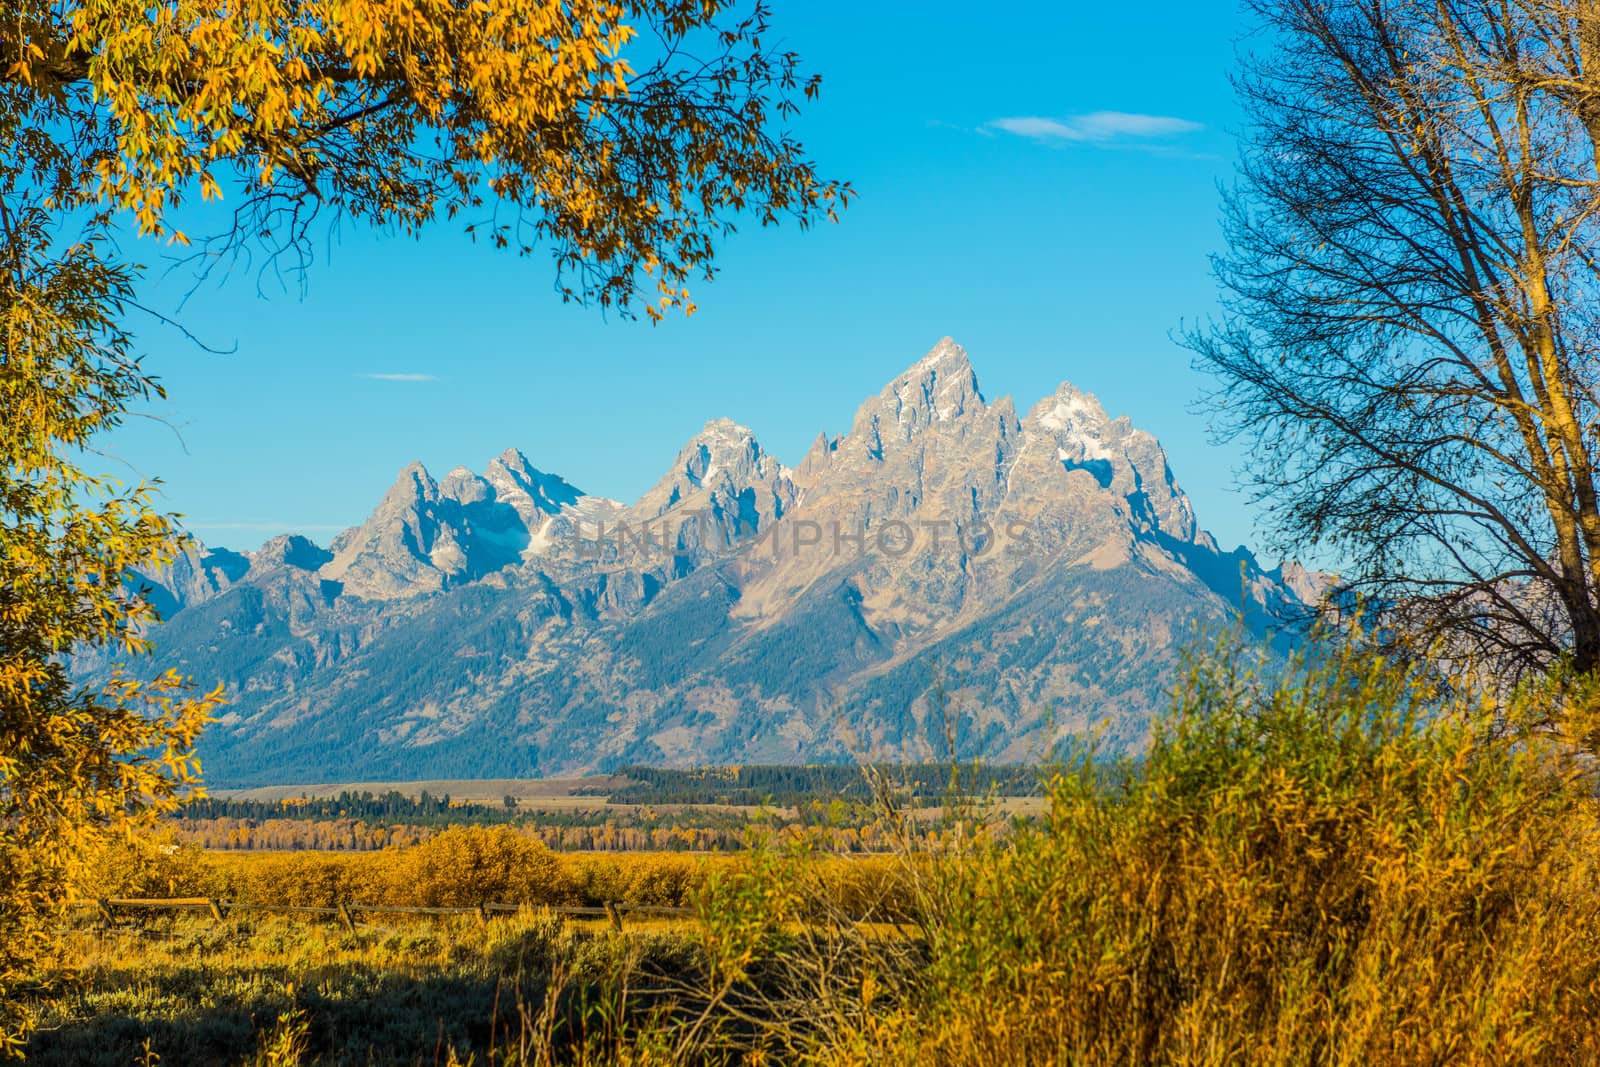 Grand Tetons viewed through Trees - Jackson Hole, WY by cestes001